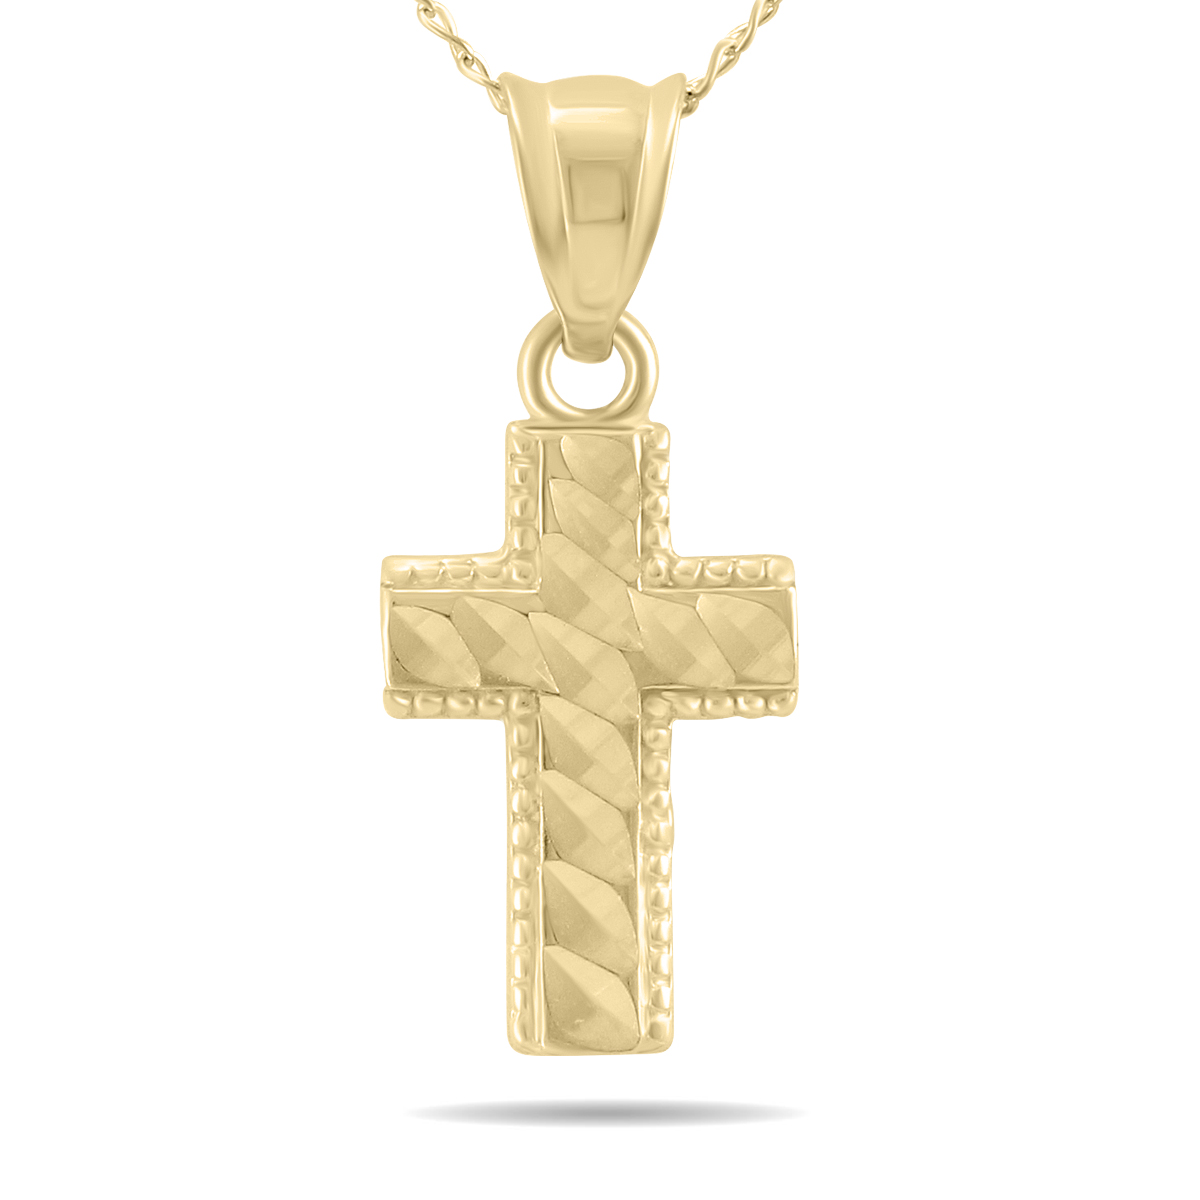 10K Yellow Gold Beaded Inlay Cross Pendant Necklace with 18 Inch Chain